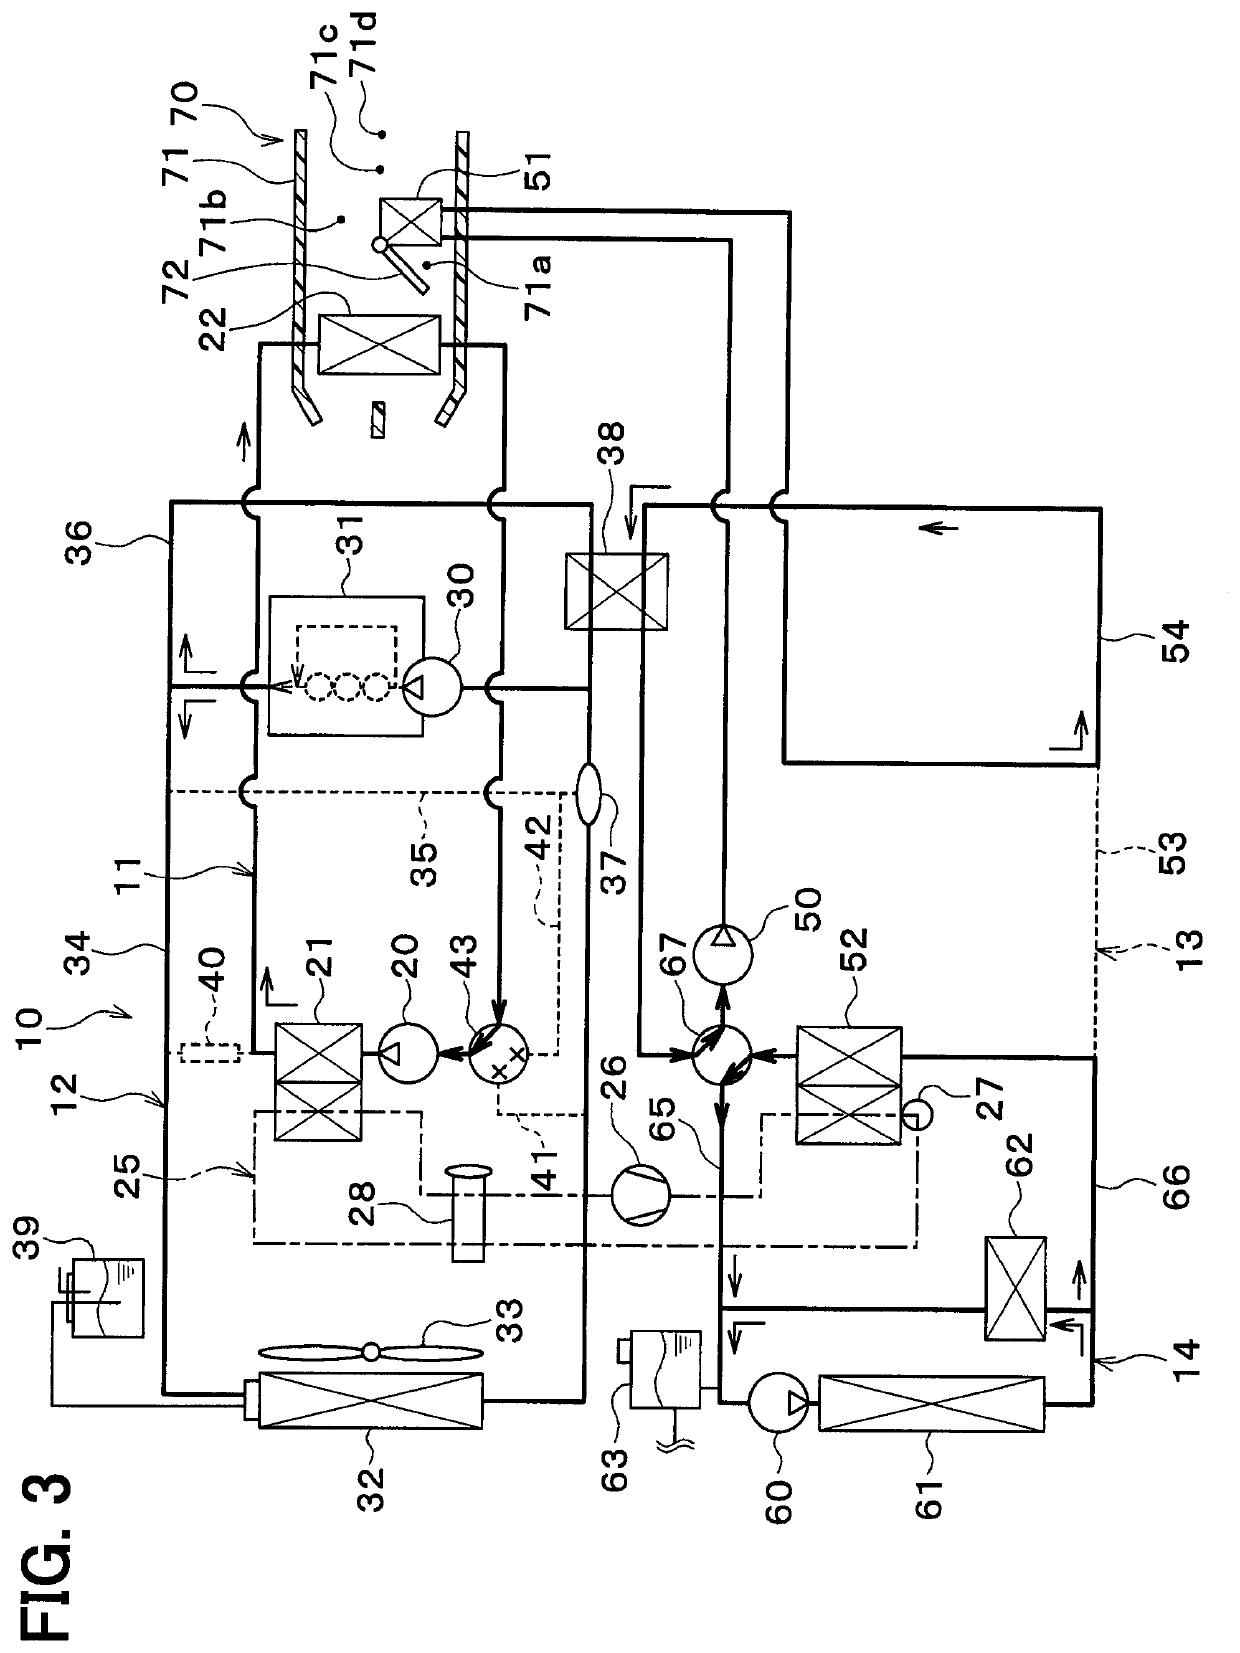 Thermal management system for vehicle